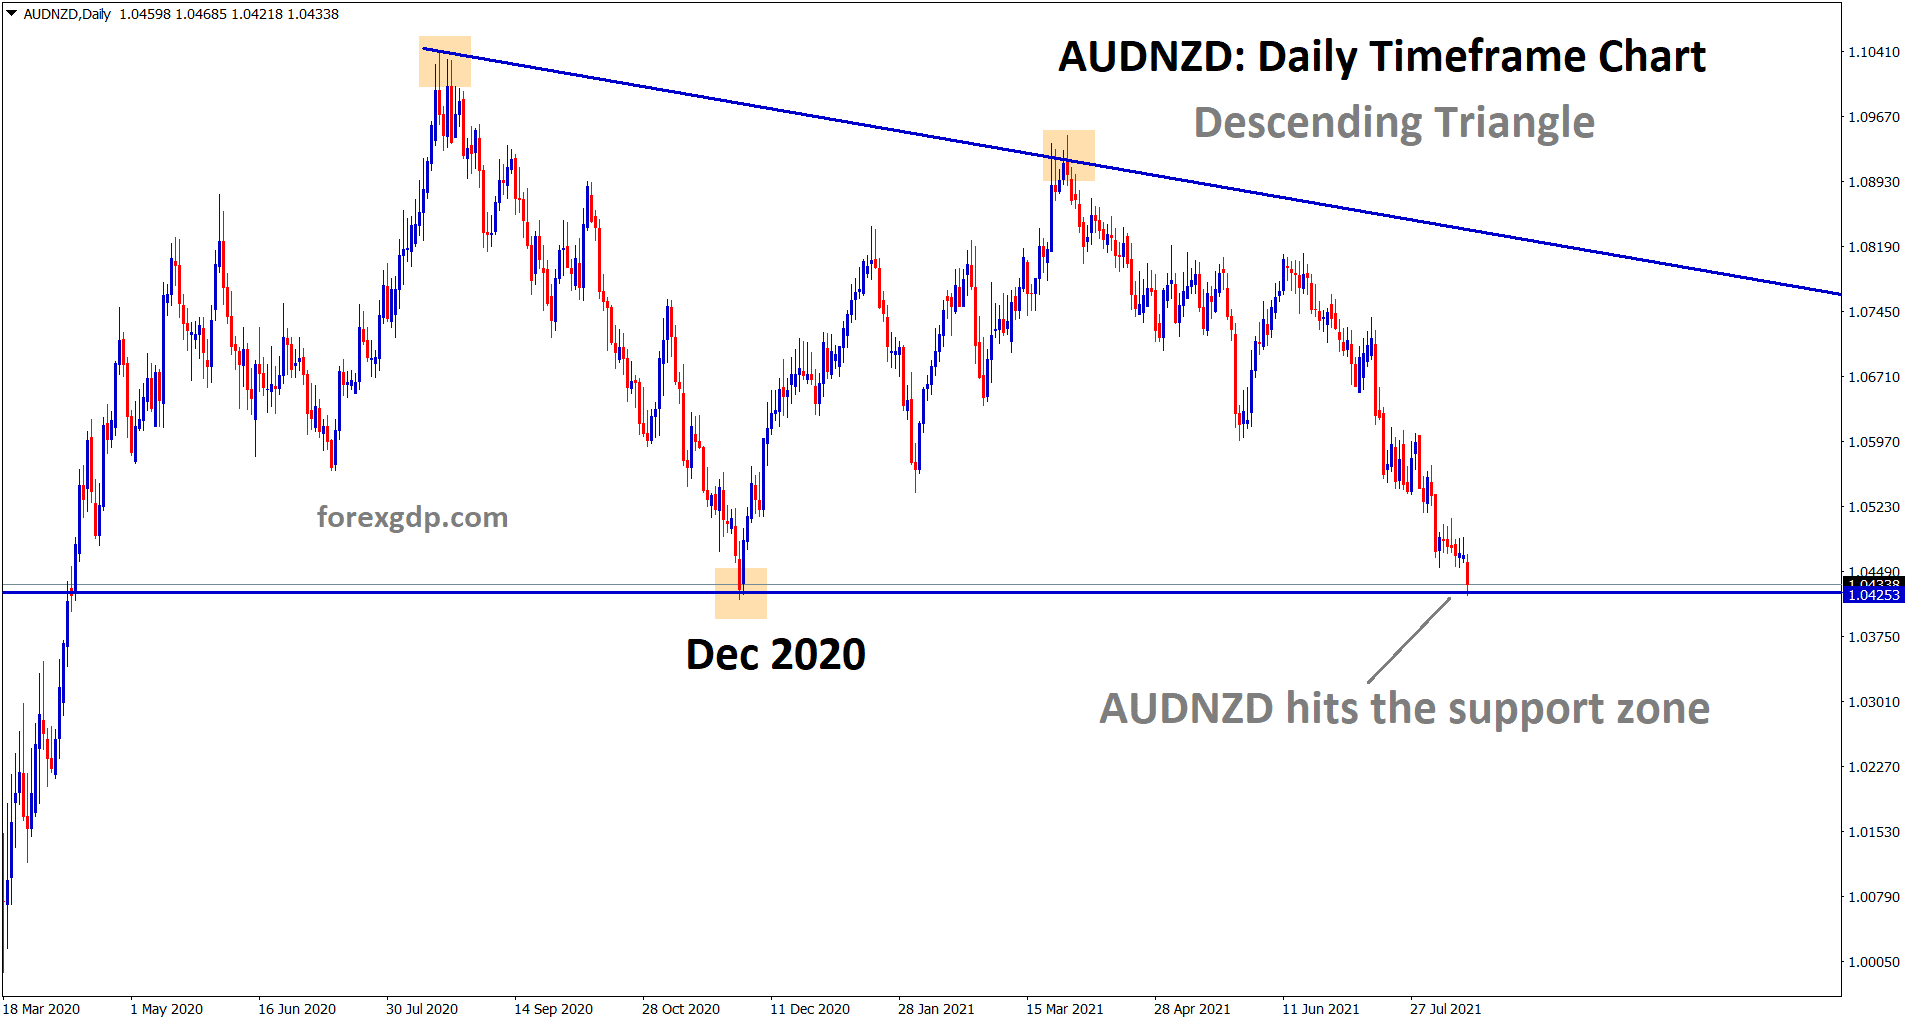 AUDNZD has reached the support of the descending triangle expecting rebound